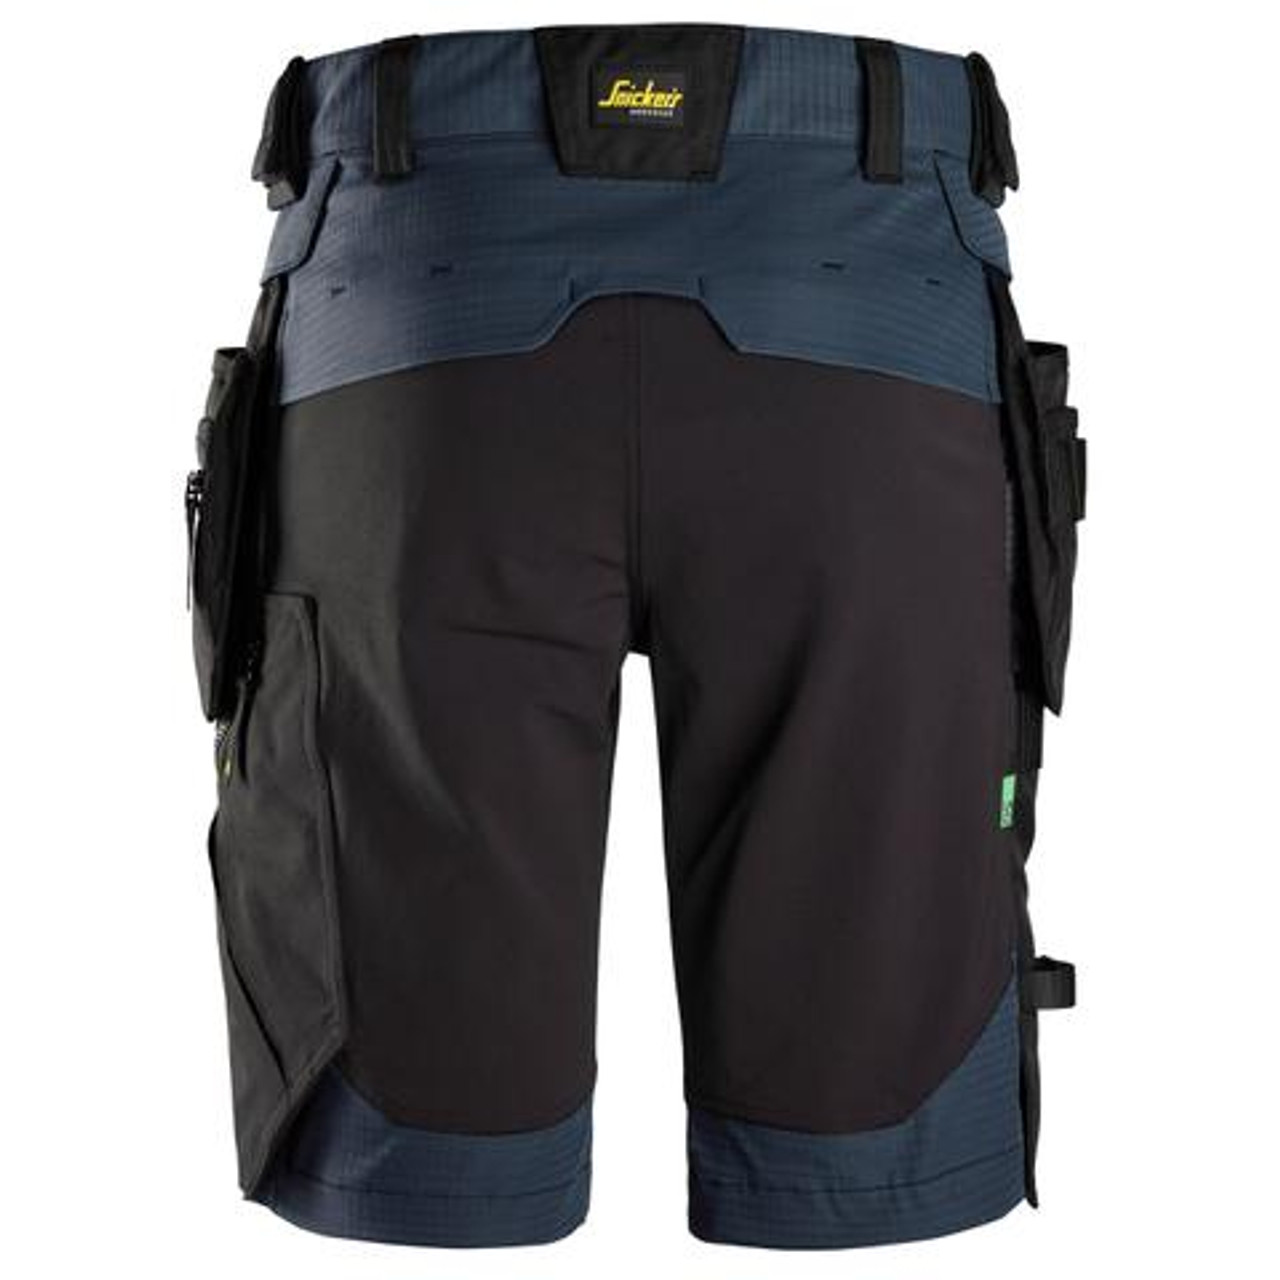 SNICKERS Shorts 6172 with Detachable Holster Pockets  for SNICKERS Shorts | 6172 Flexi Work Navy Blue Shorts with Detachable Holster Pockets 2-Way Stretch that have Configuration available in Electrical